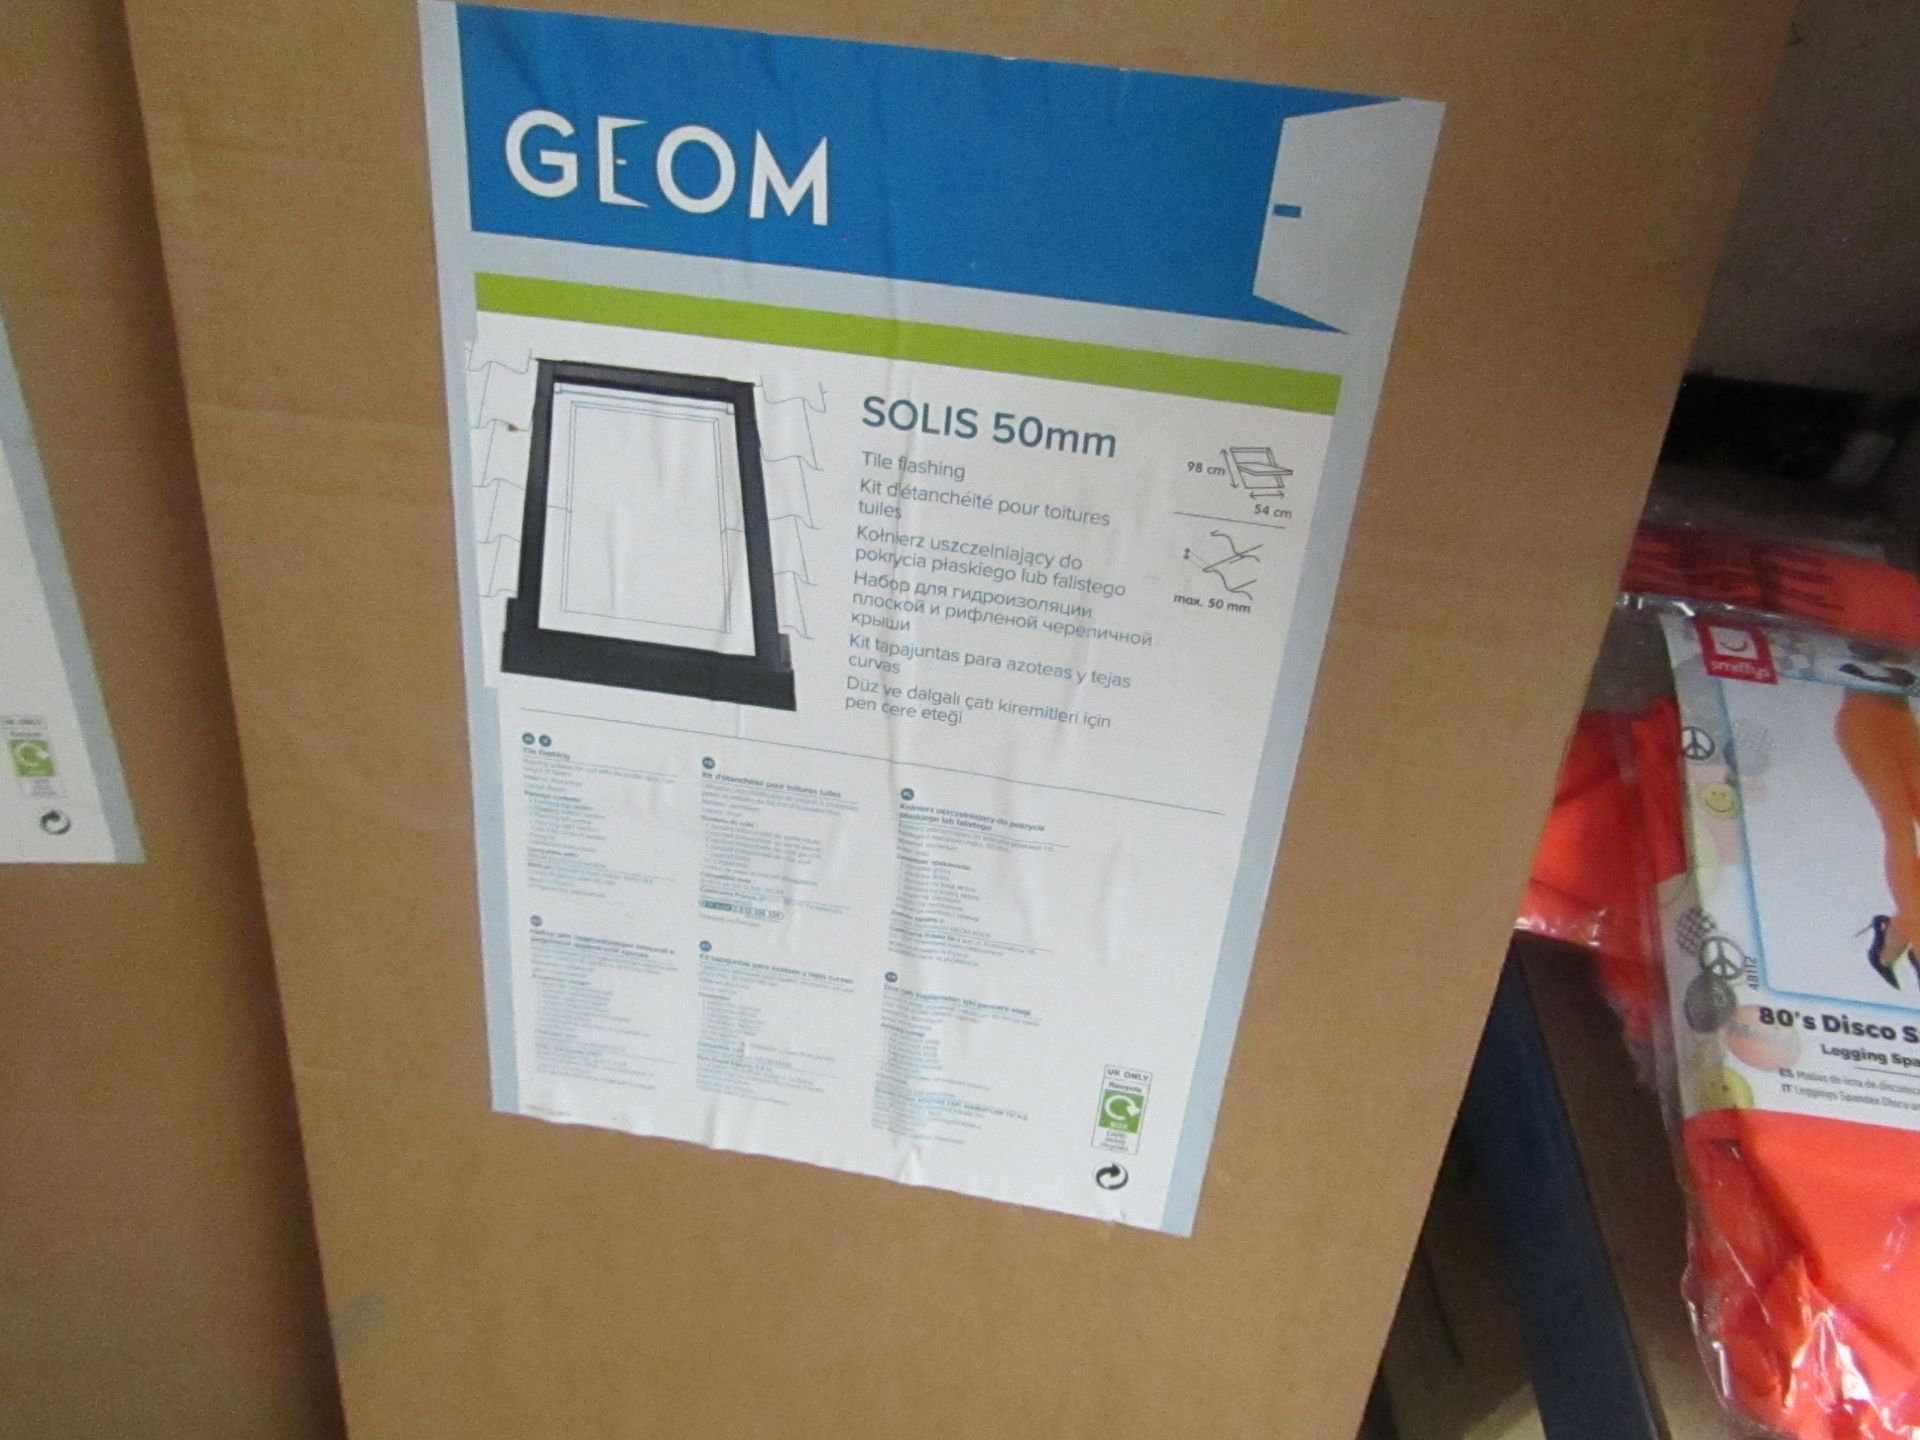 Geom - Solis 50mm Slate Flashing (Suitable For Finishing Tiles) - Unchecked & Boxed.